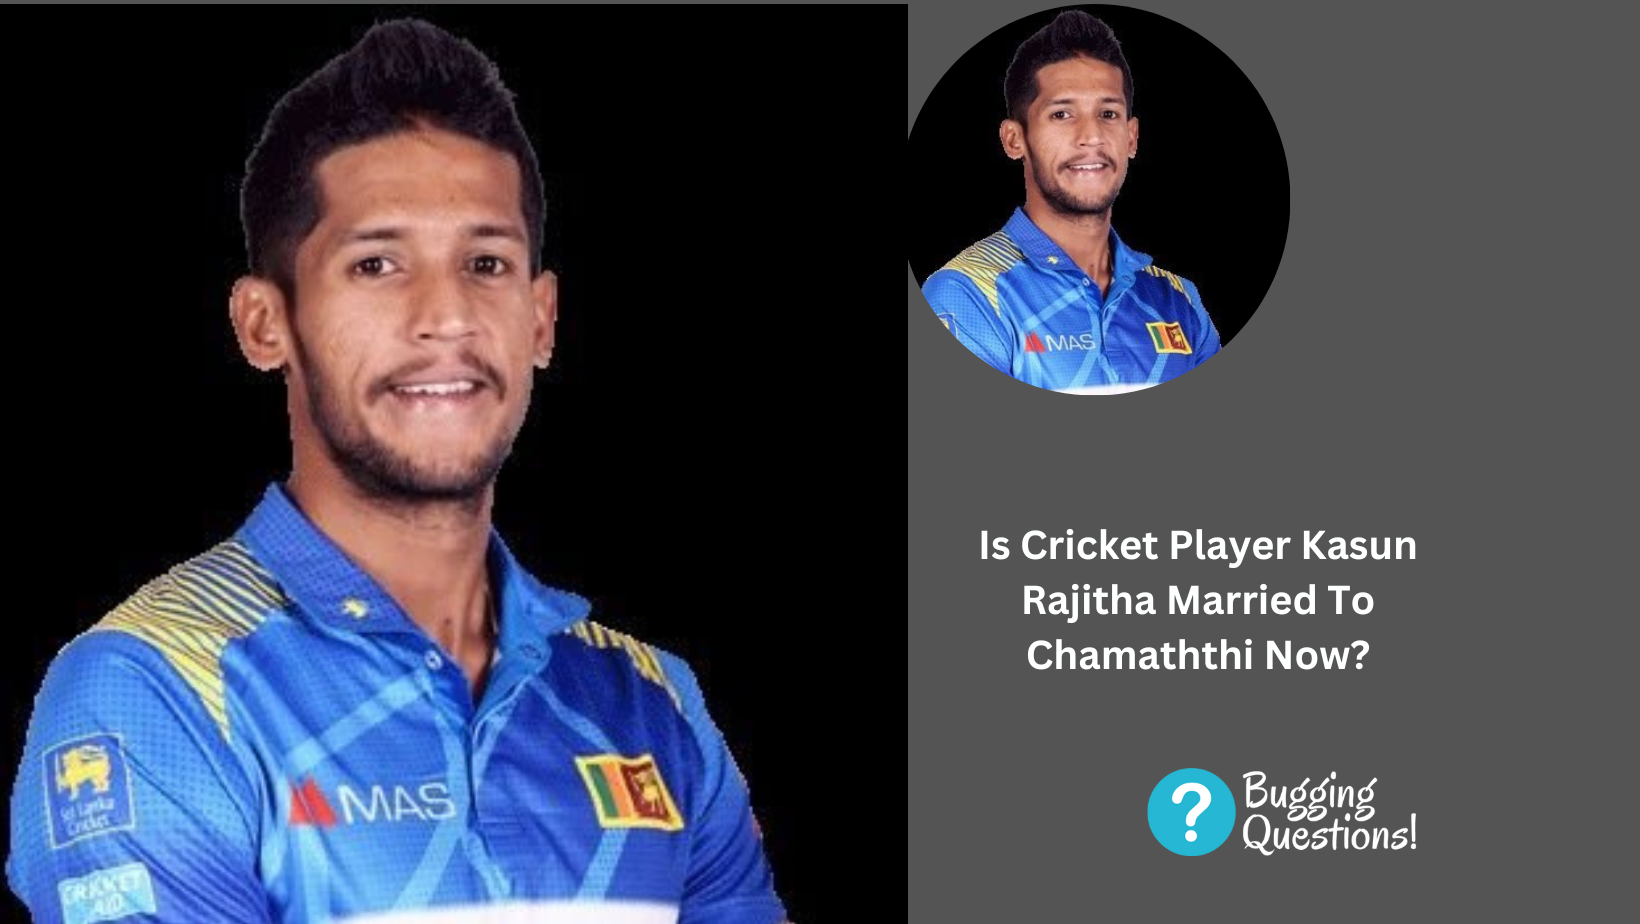 Is Cricket Player Kasun Rajitha Married To Chamaththi Now?